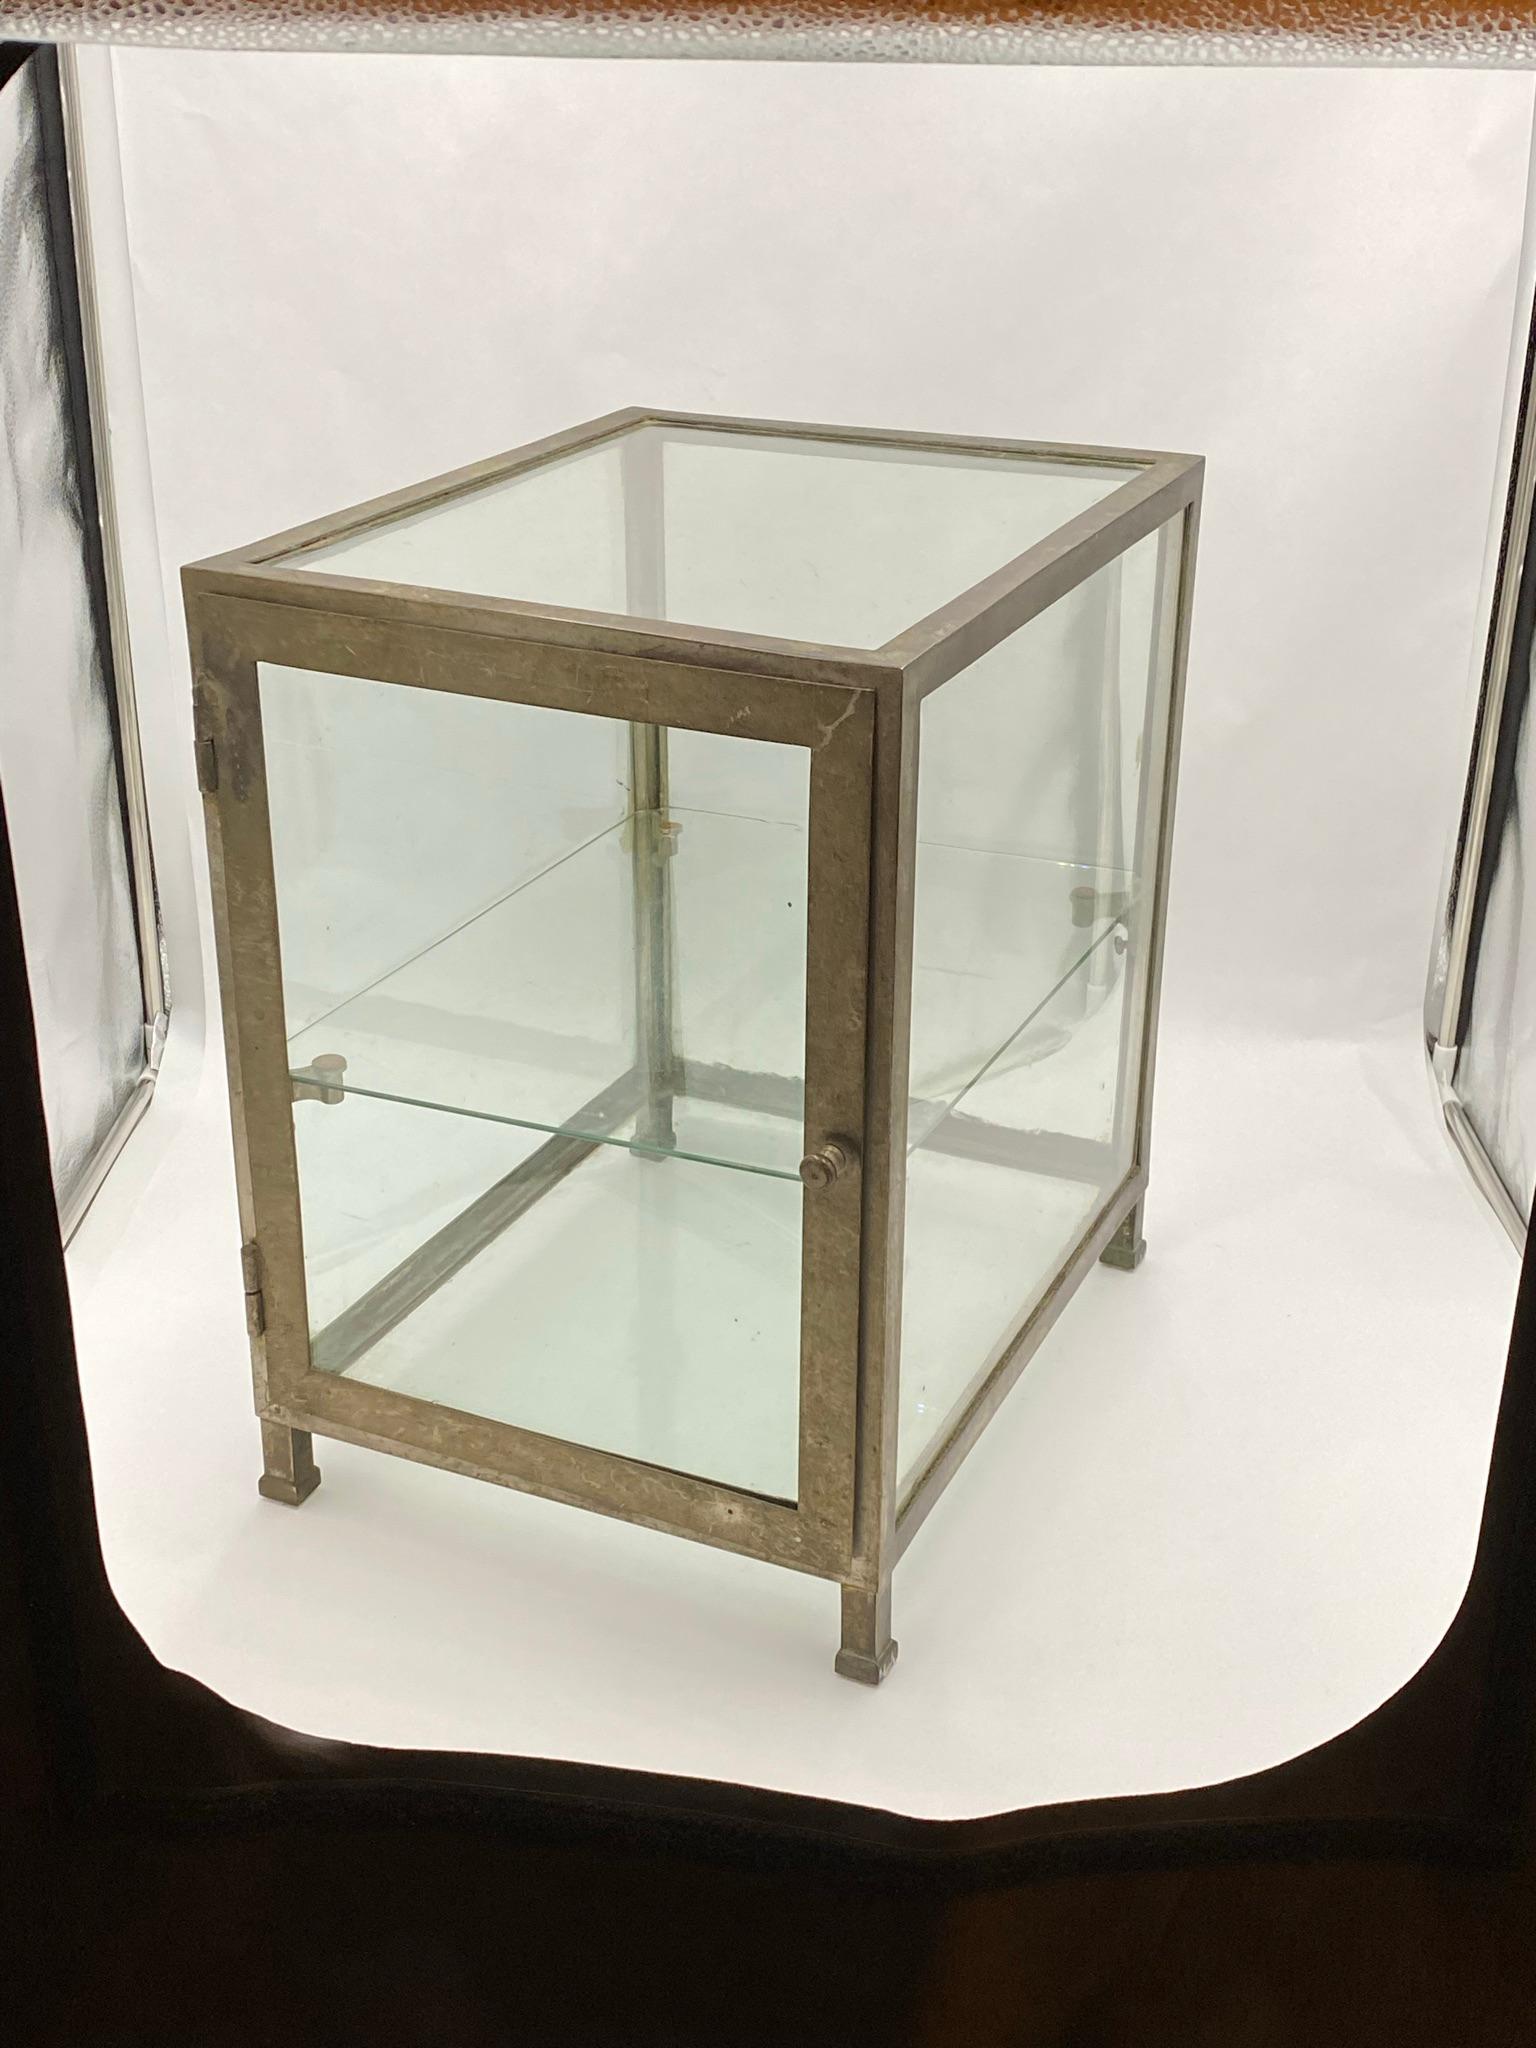 Early 20th century counter top display case. Frame is nickel plated brass and comes with one glass shelf. Front door sticks slightly. From France. This can be seen at our 333 West 52nd St location in the Theater District West of Manhattan.